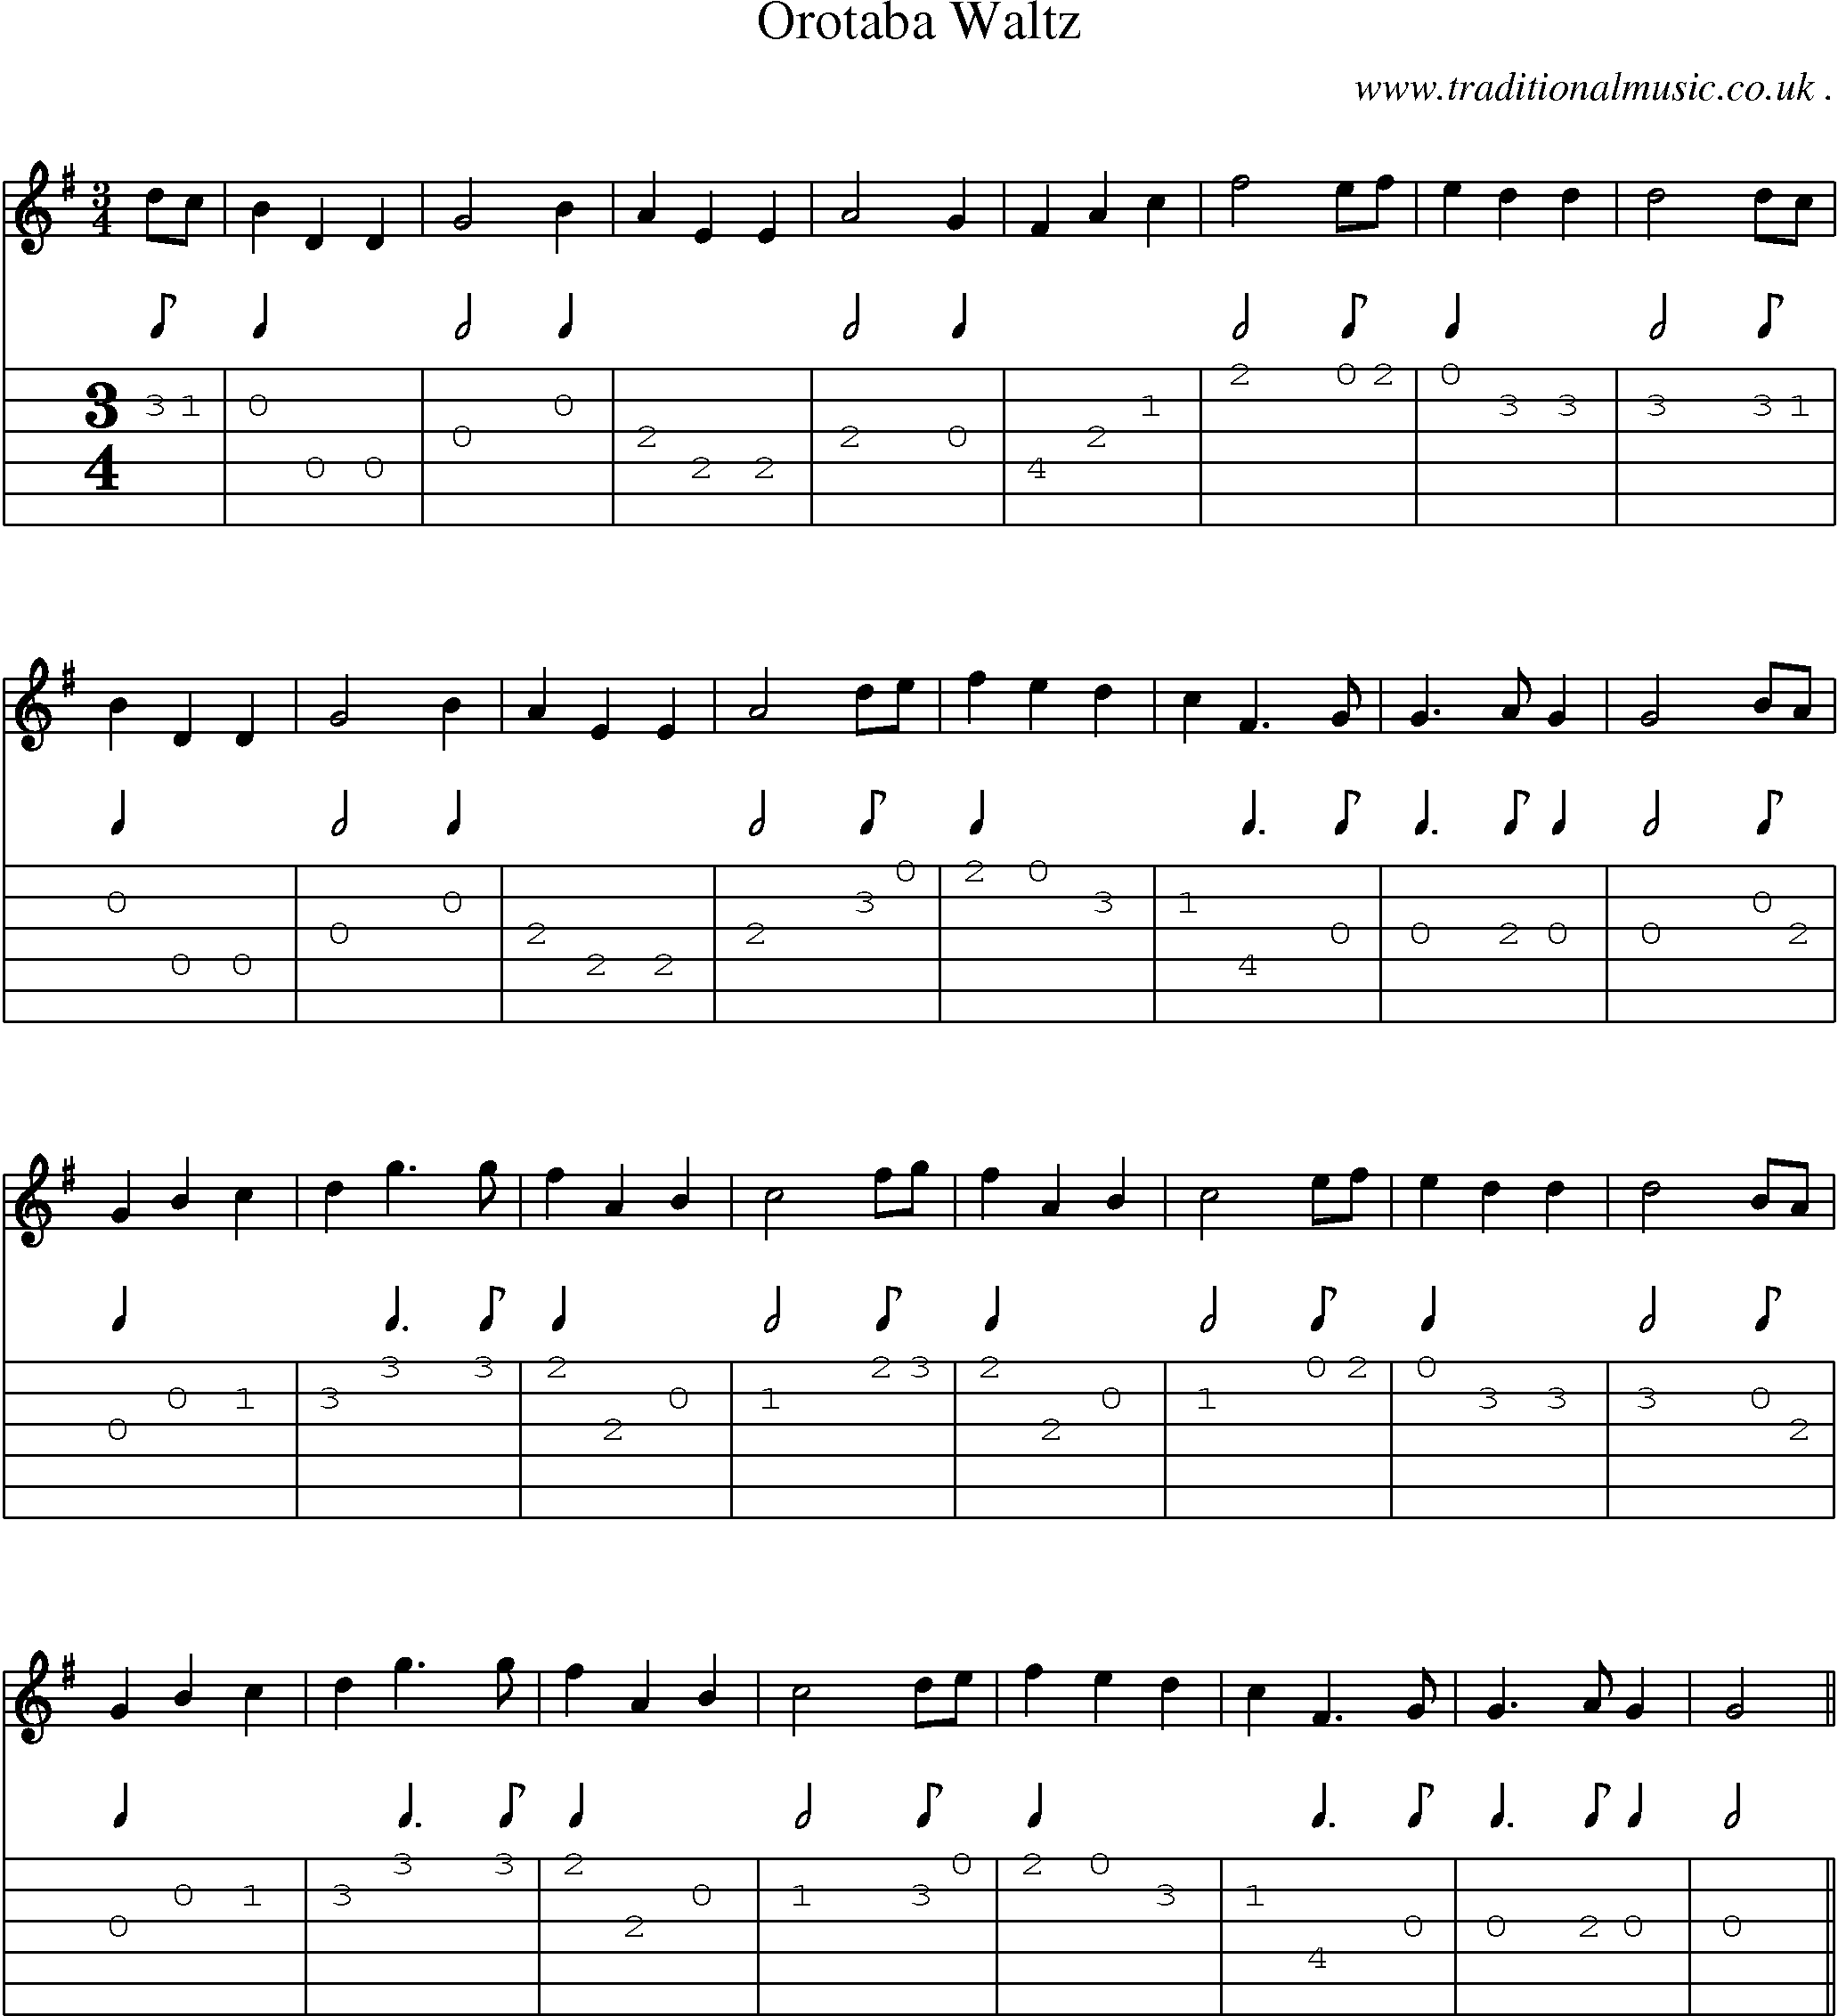 Sheet-Music and Guitar Tabs for Orotaba Waltz